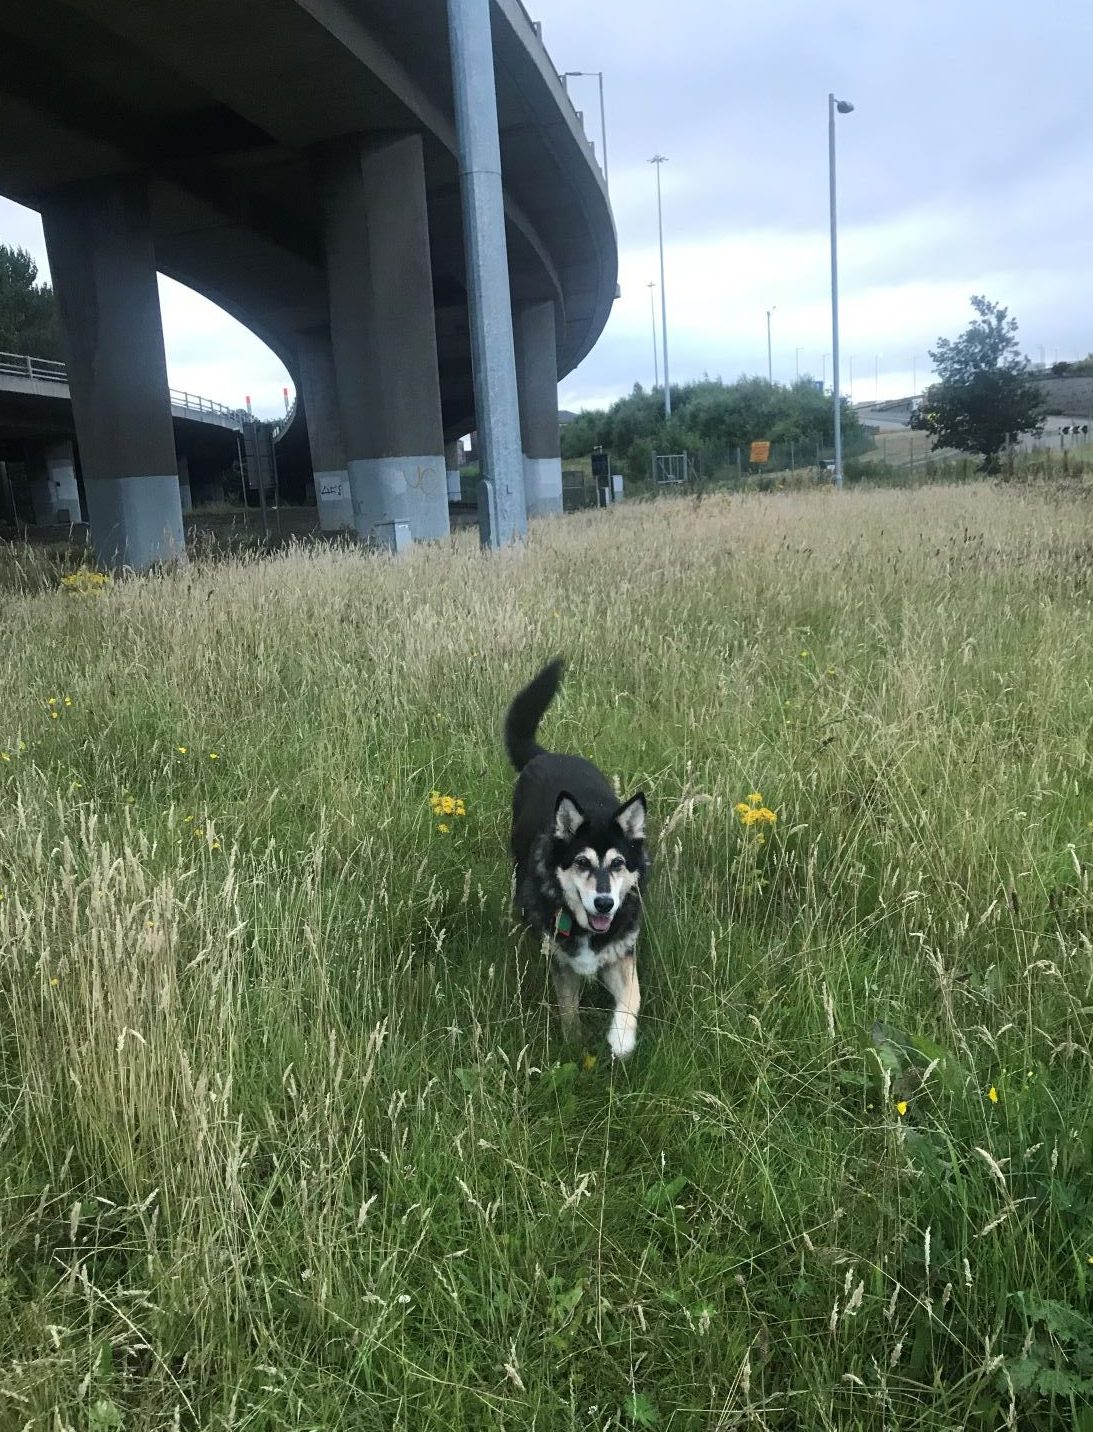 The image shows Raksha approaching. She appears to be having fun. She is panting a little, has one paw lifted up, mid-stride. Her cheeks and eyebrows are white, her eyes and most of the rest of her is black. Her ears are two white triangles with black outlines. The field is green and tan with golden flowers. An overpass and some trees loom in the background. 